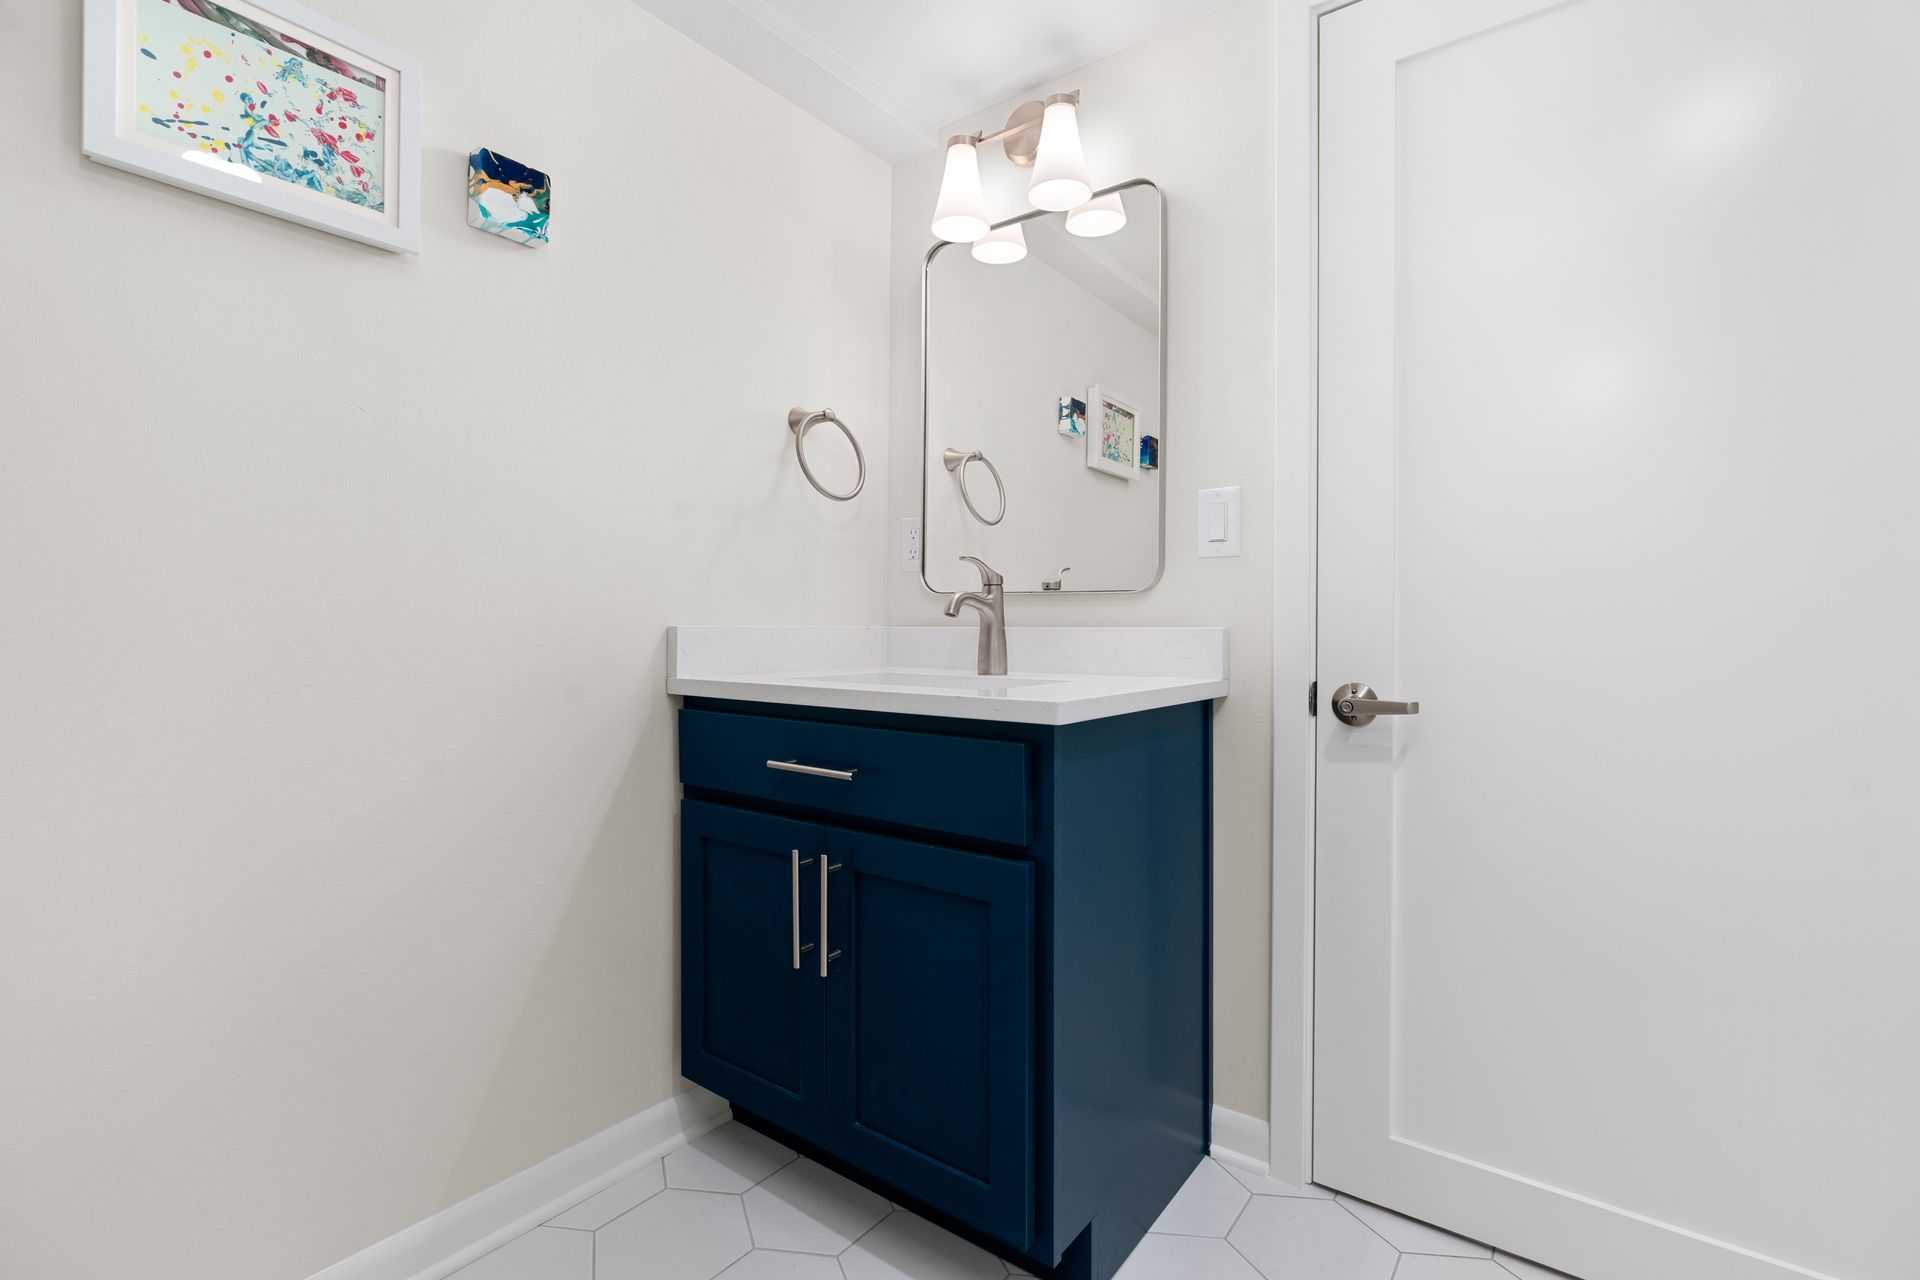 A bathroom with a blue vanity and a mirror.